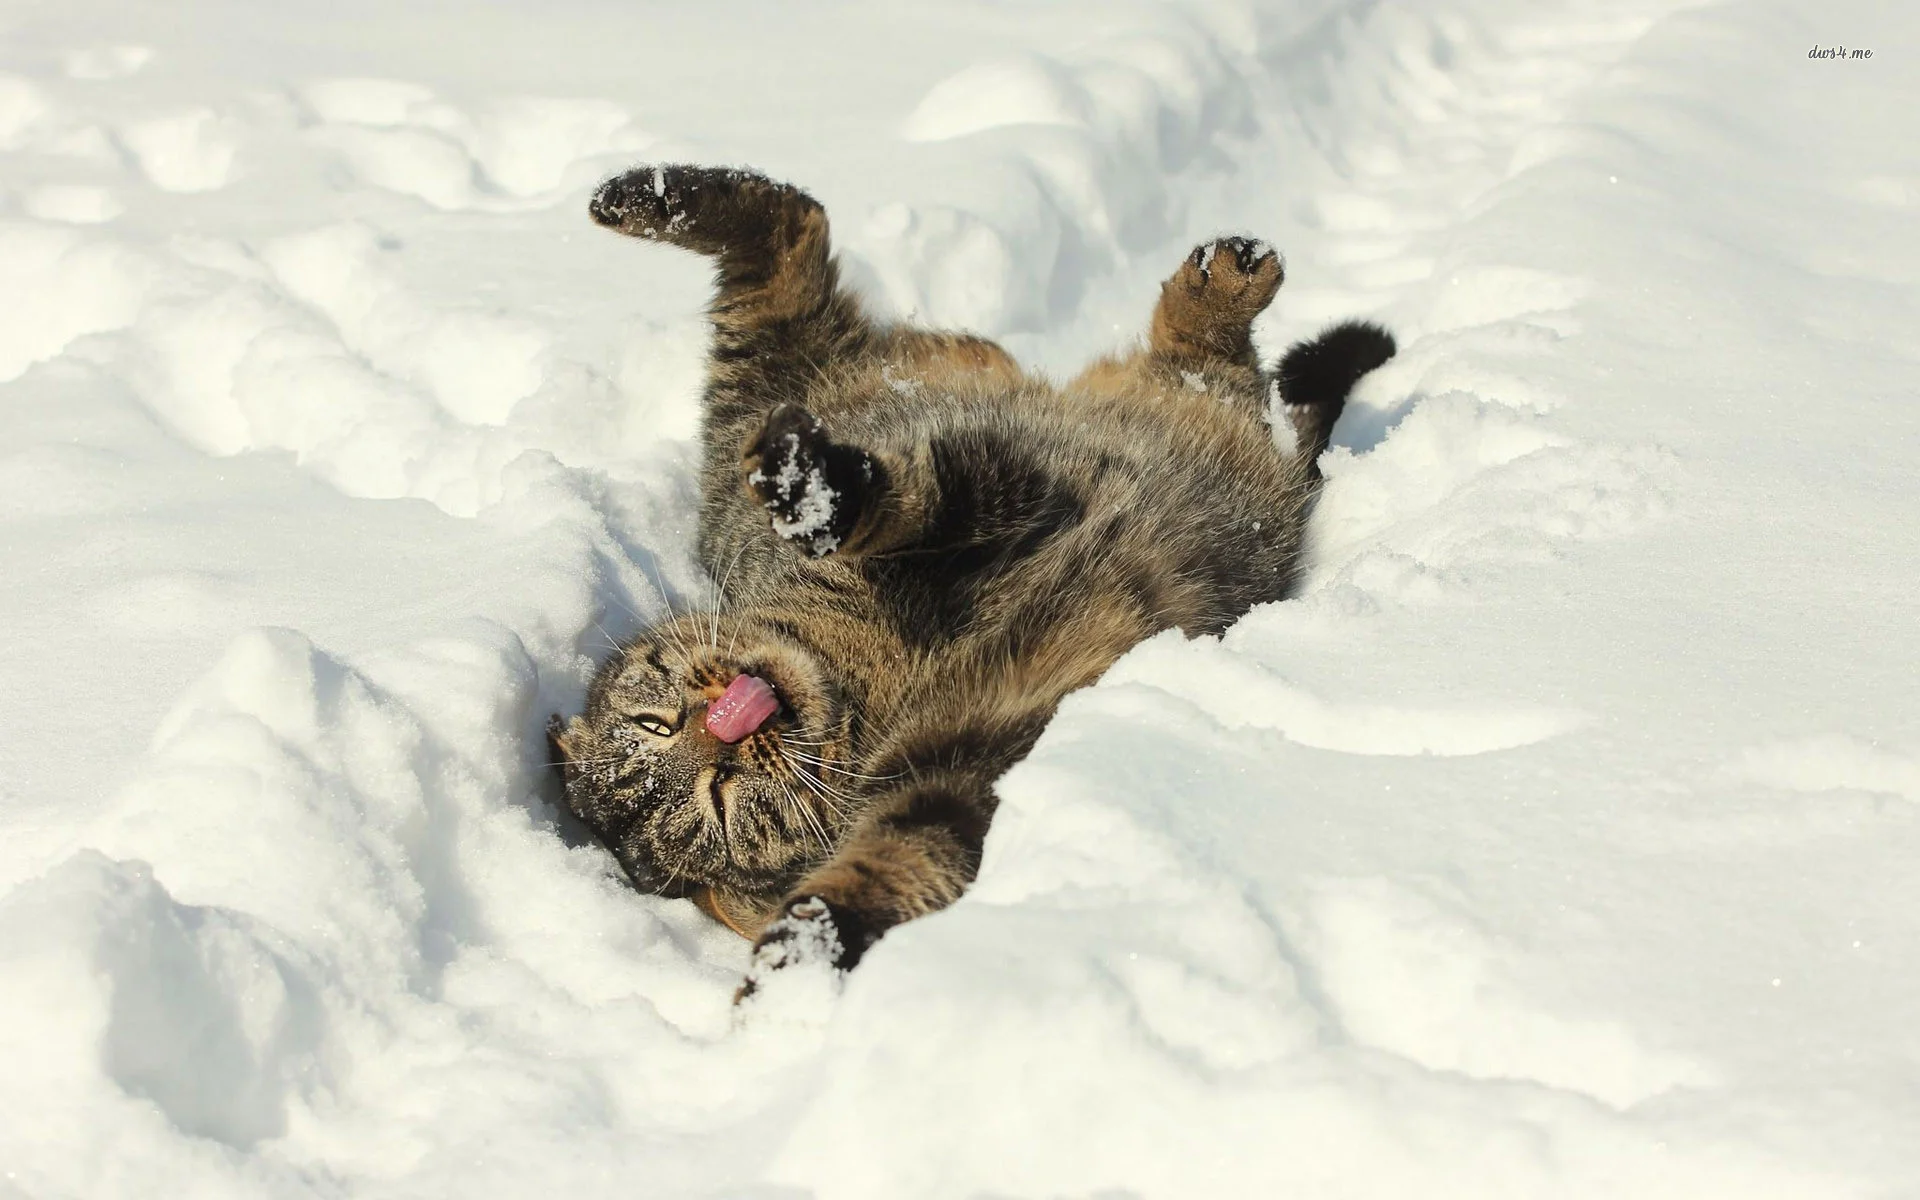 Funny cat in the snow wallpaper – Animal wallpapers